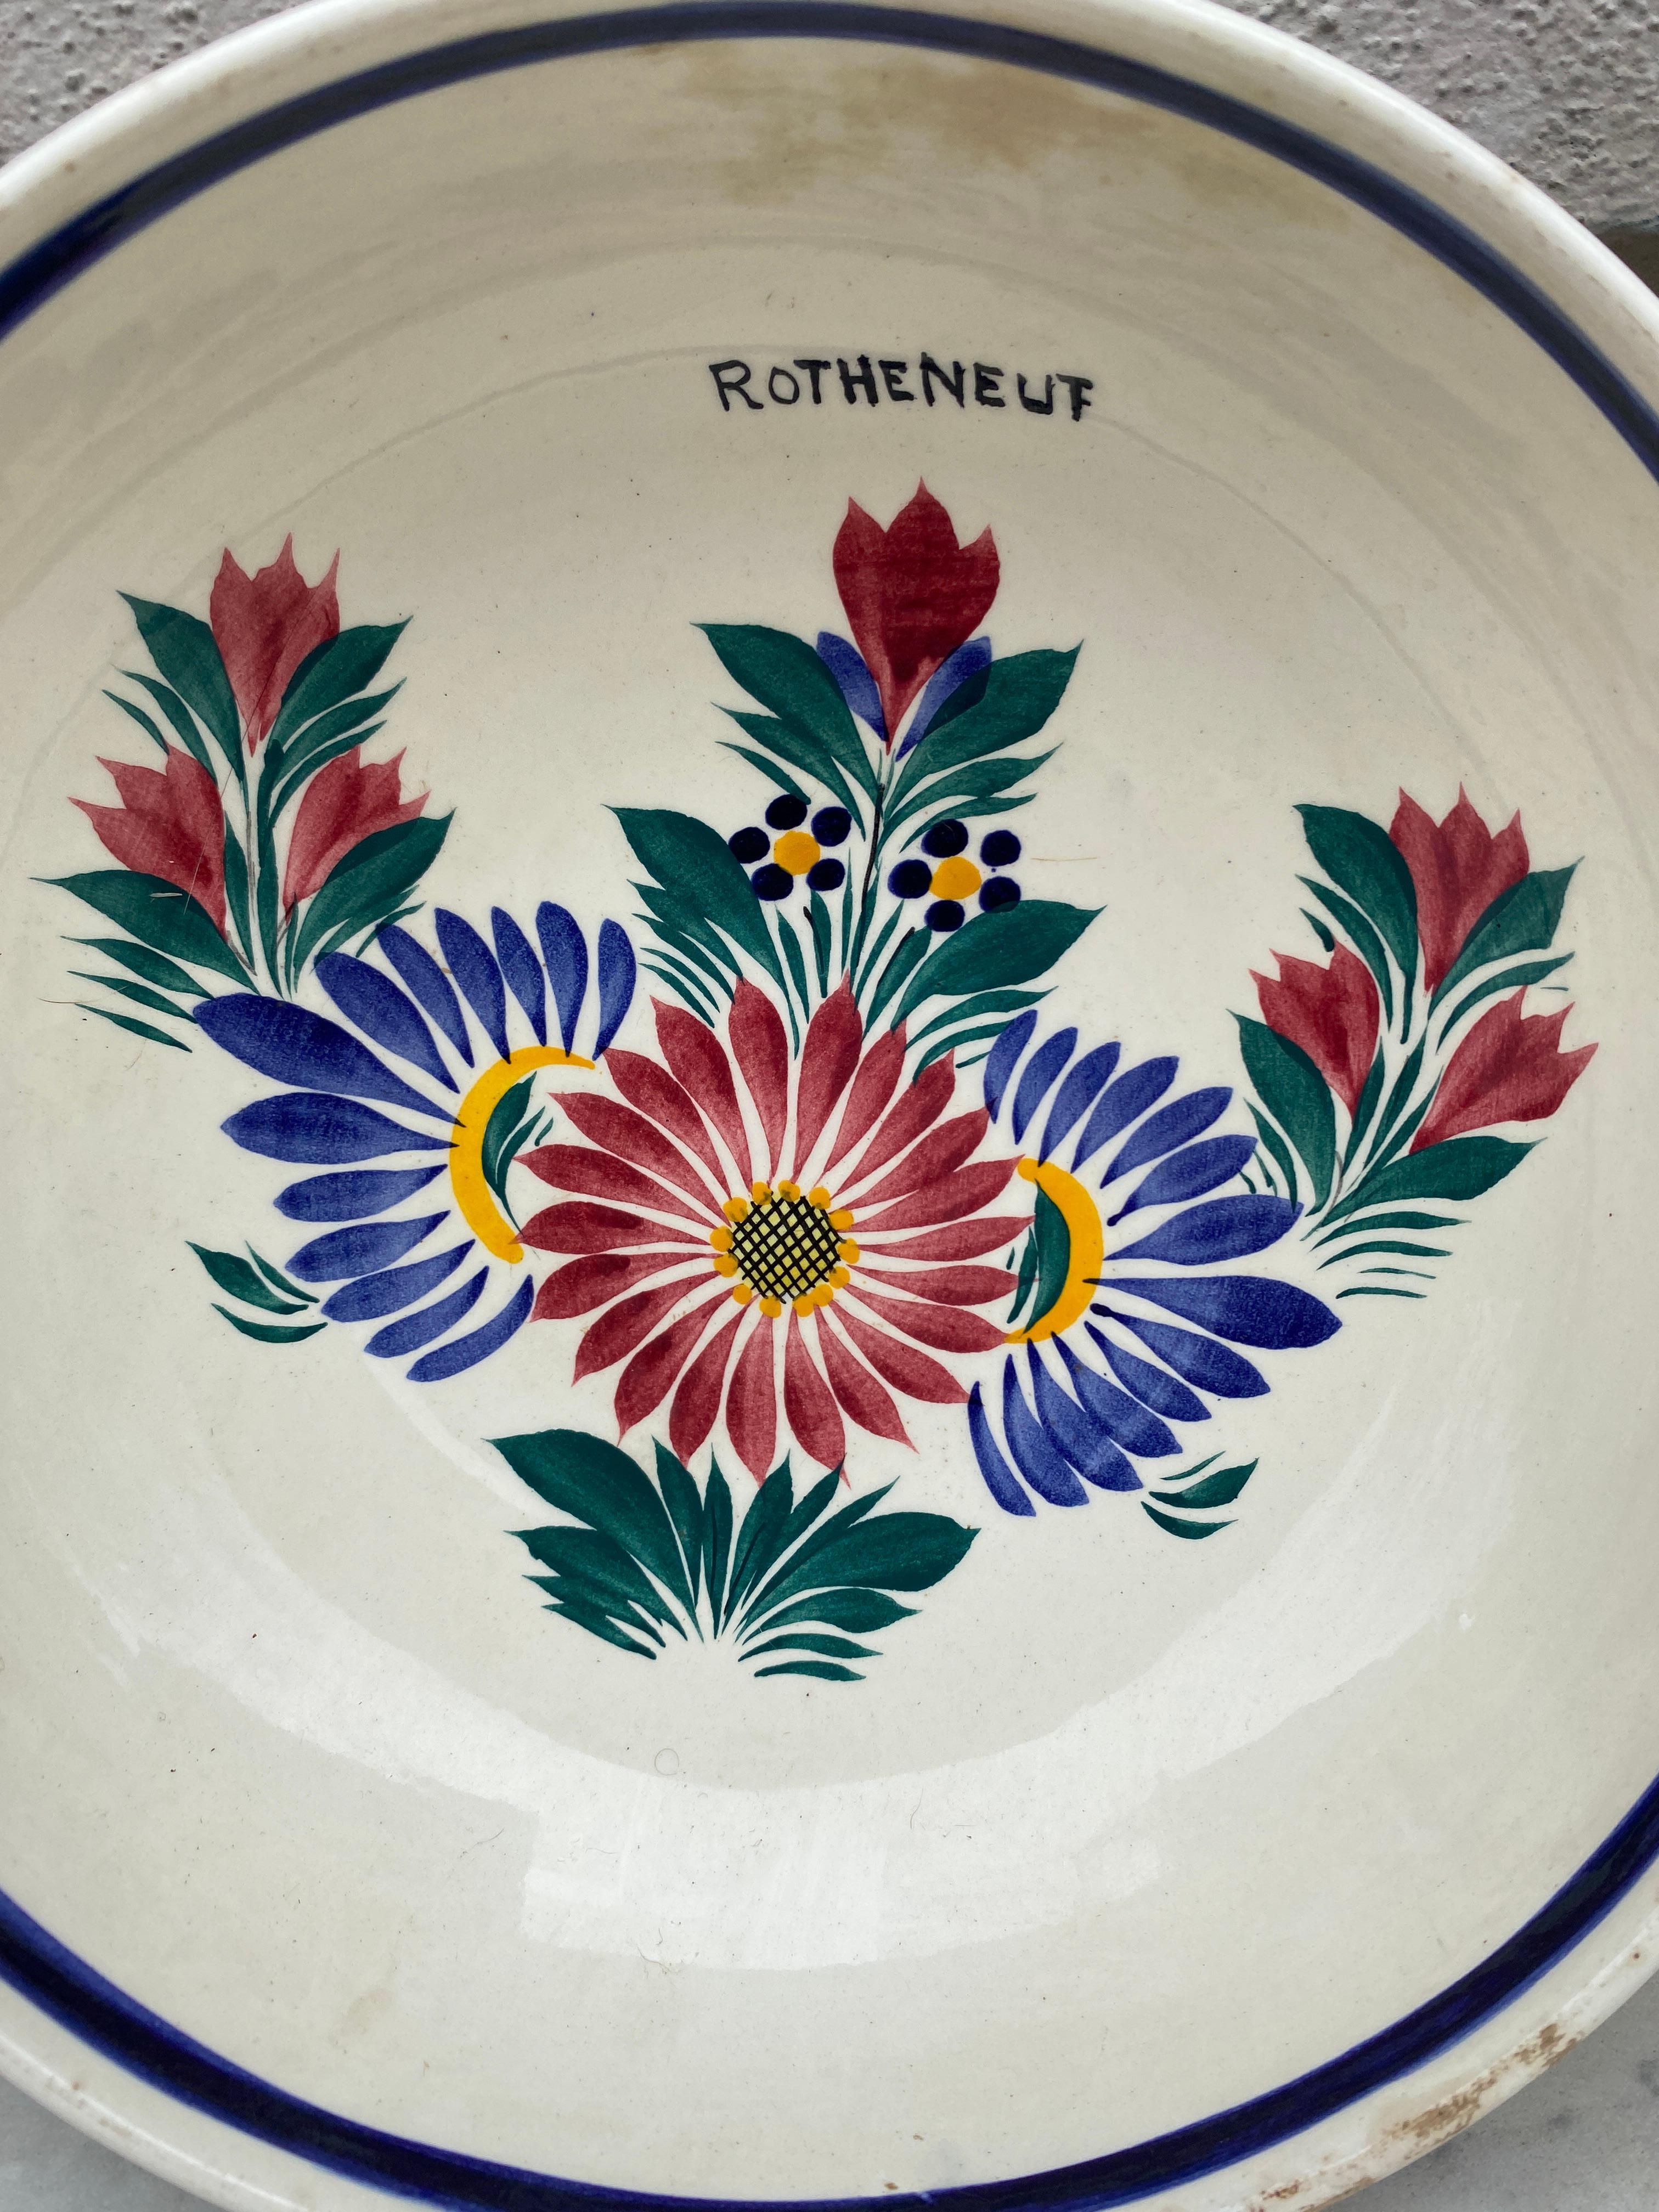 Large French Faience bowl Henriot Quimper, circa 1930.
Rotheneuf.